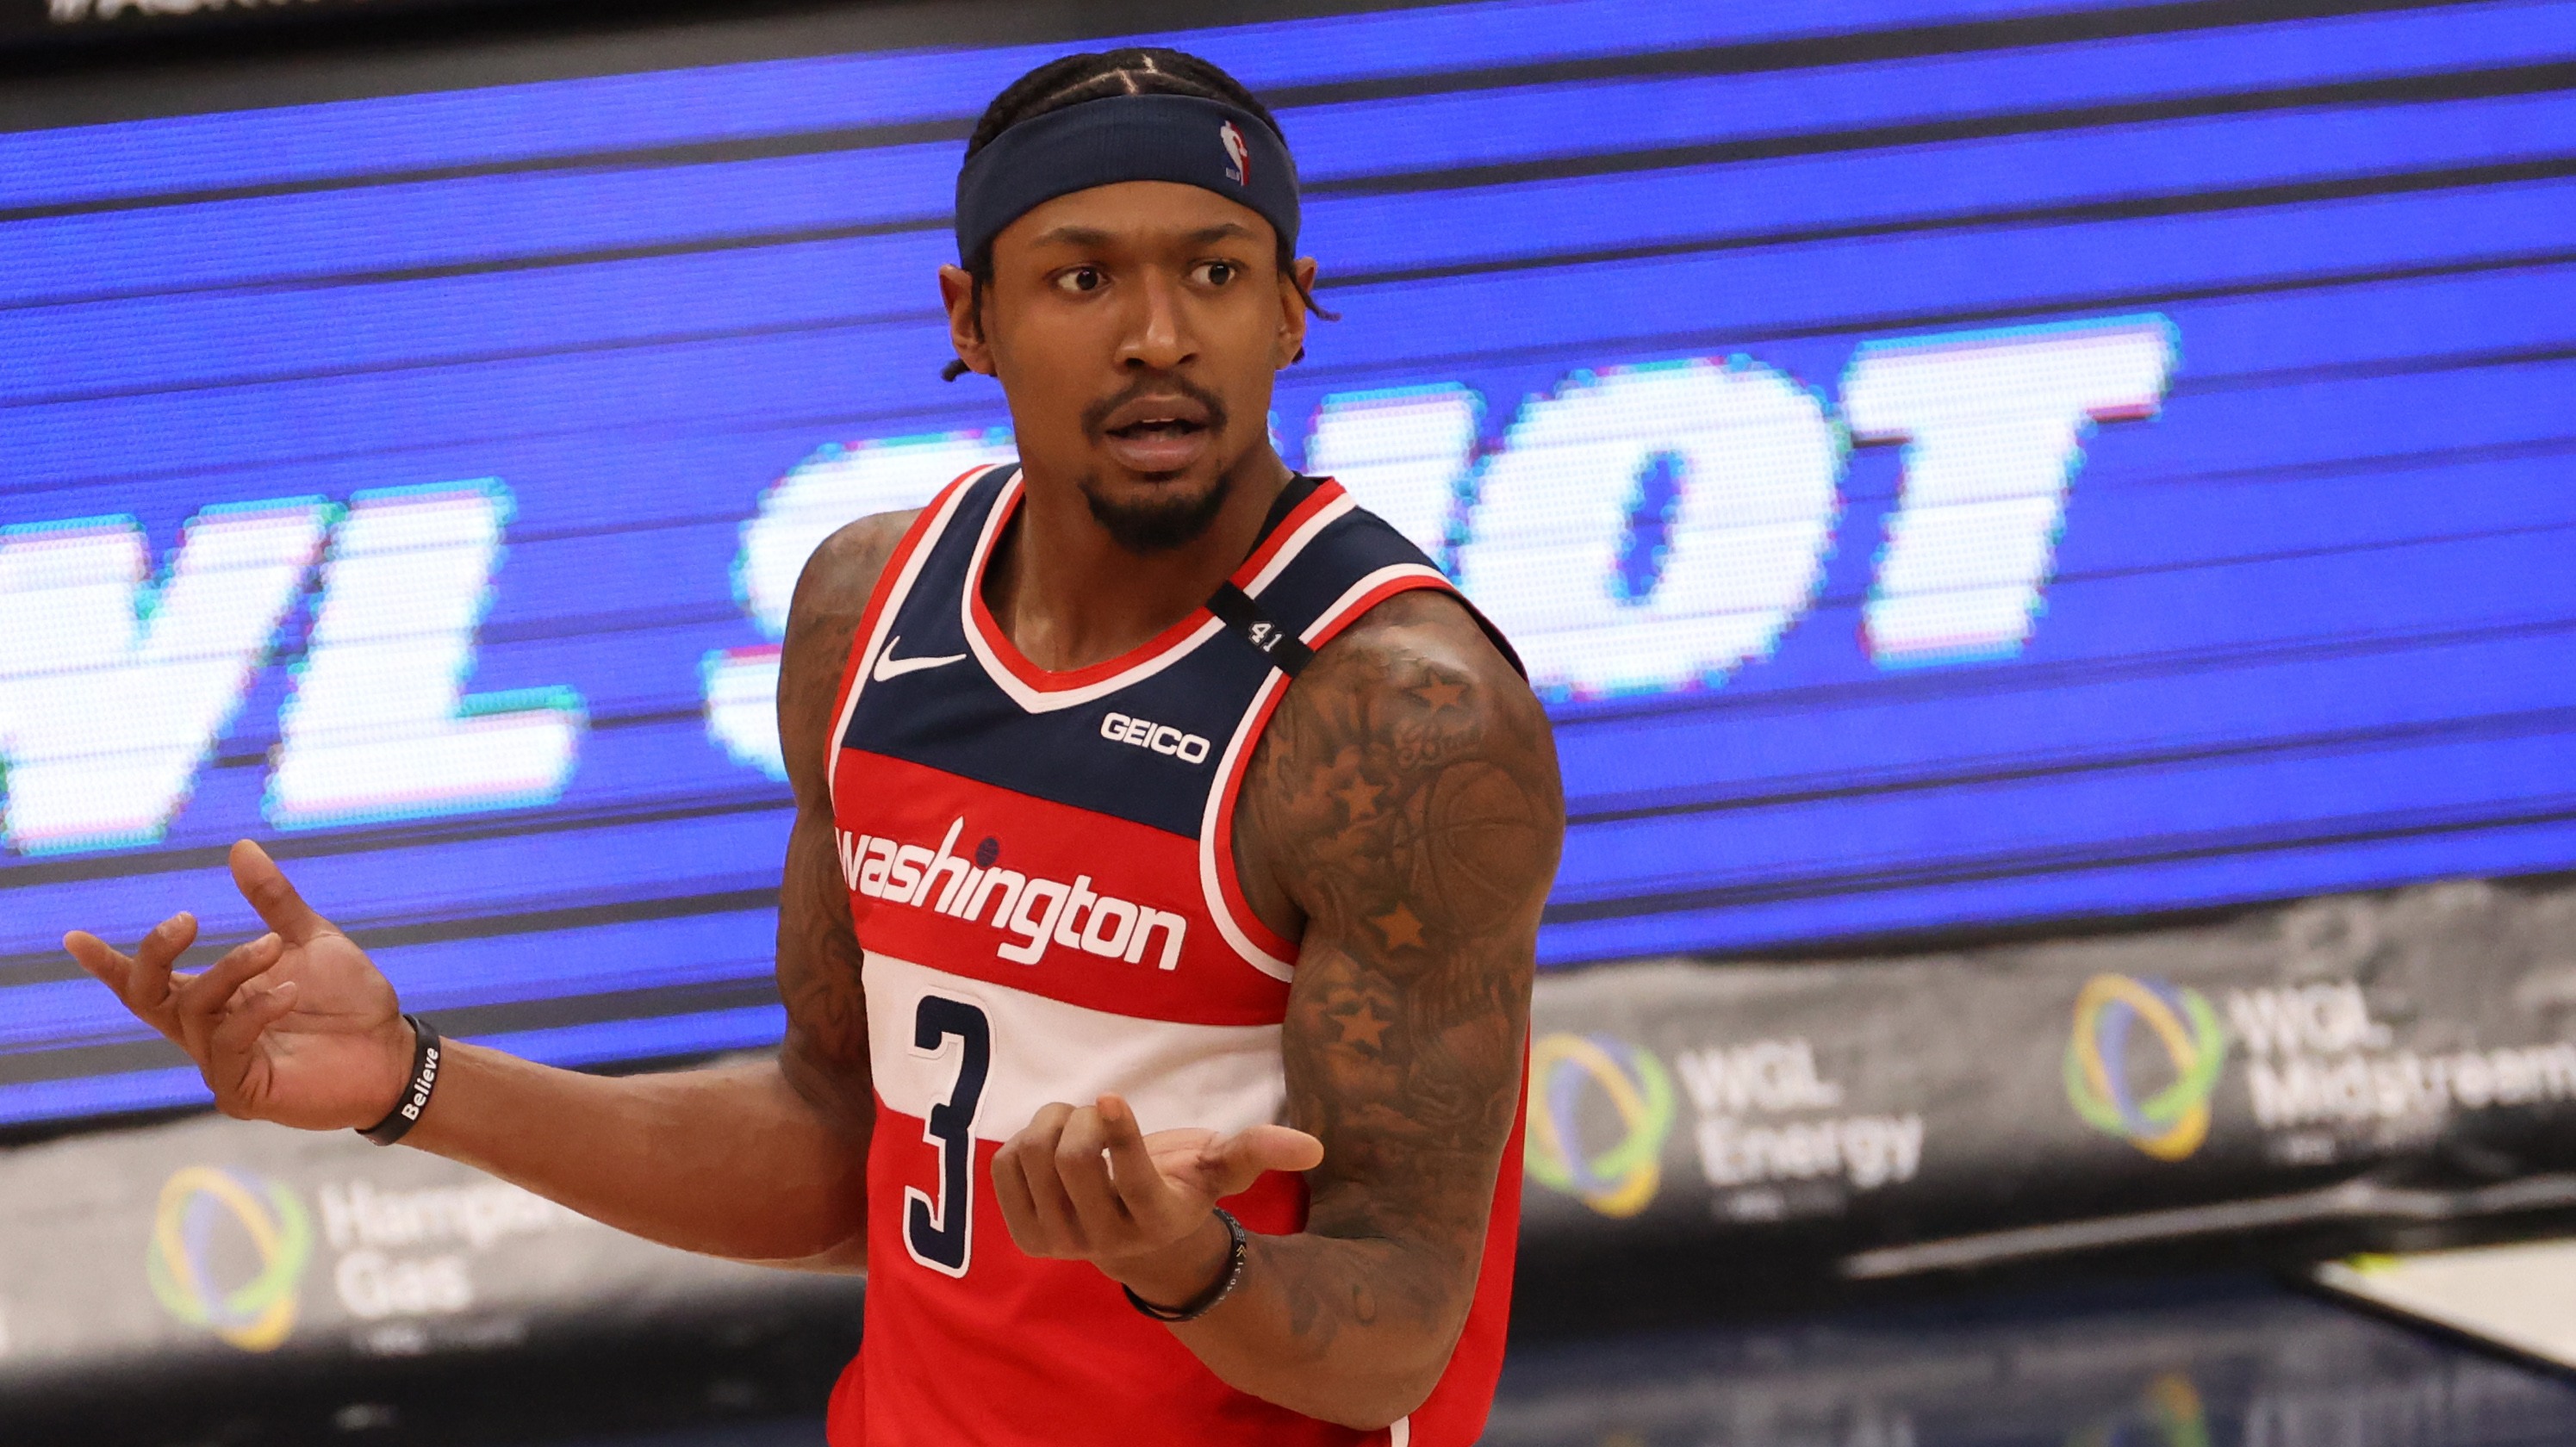 Bradley Beal to Miss Game Vs. Knicks Due to Rest